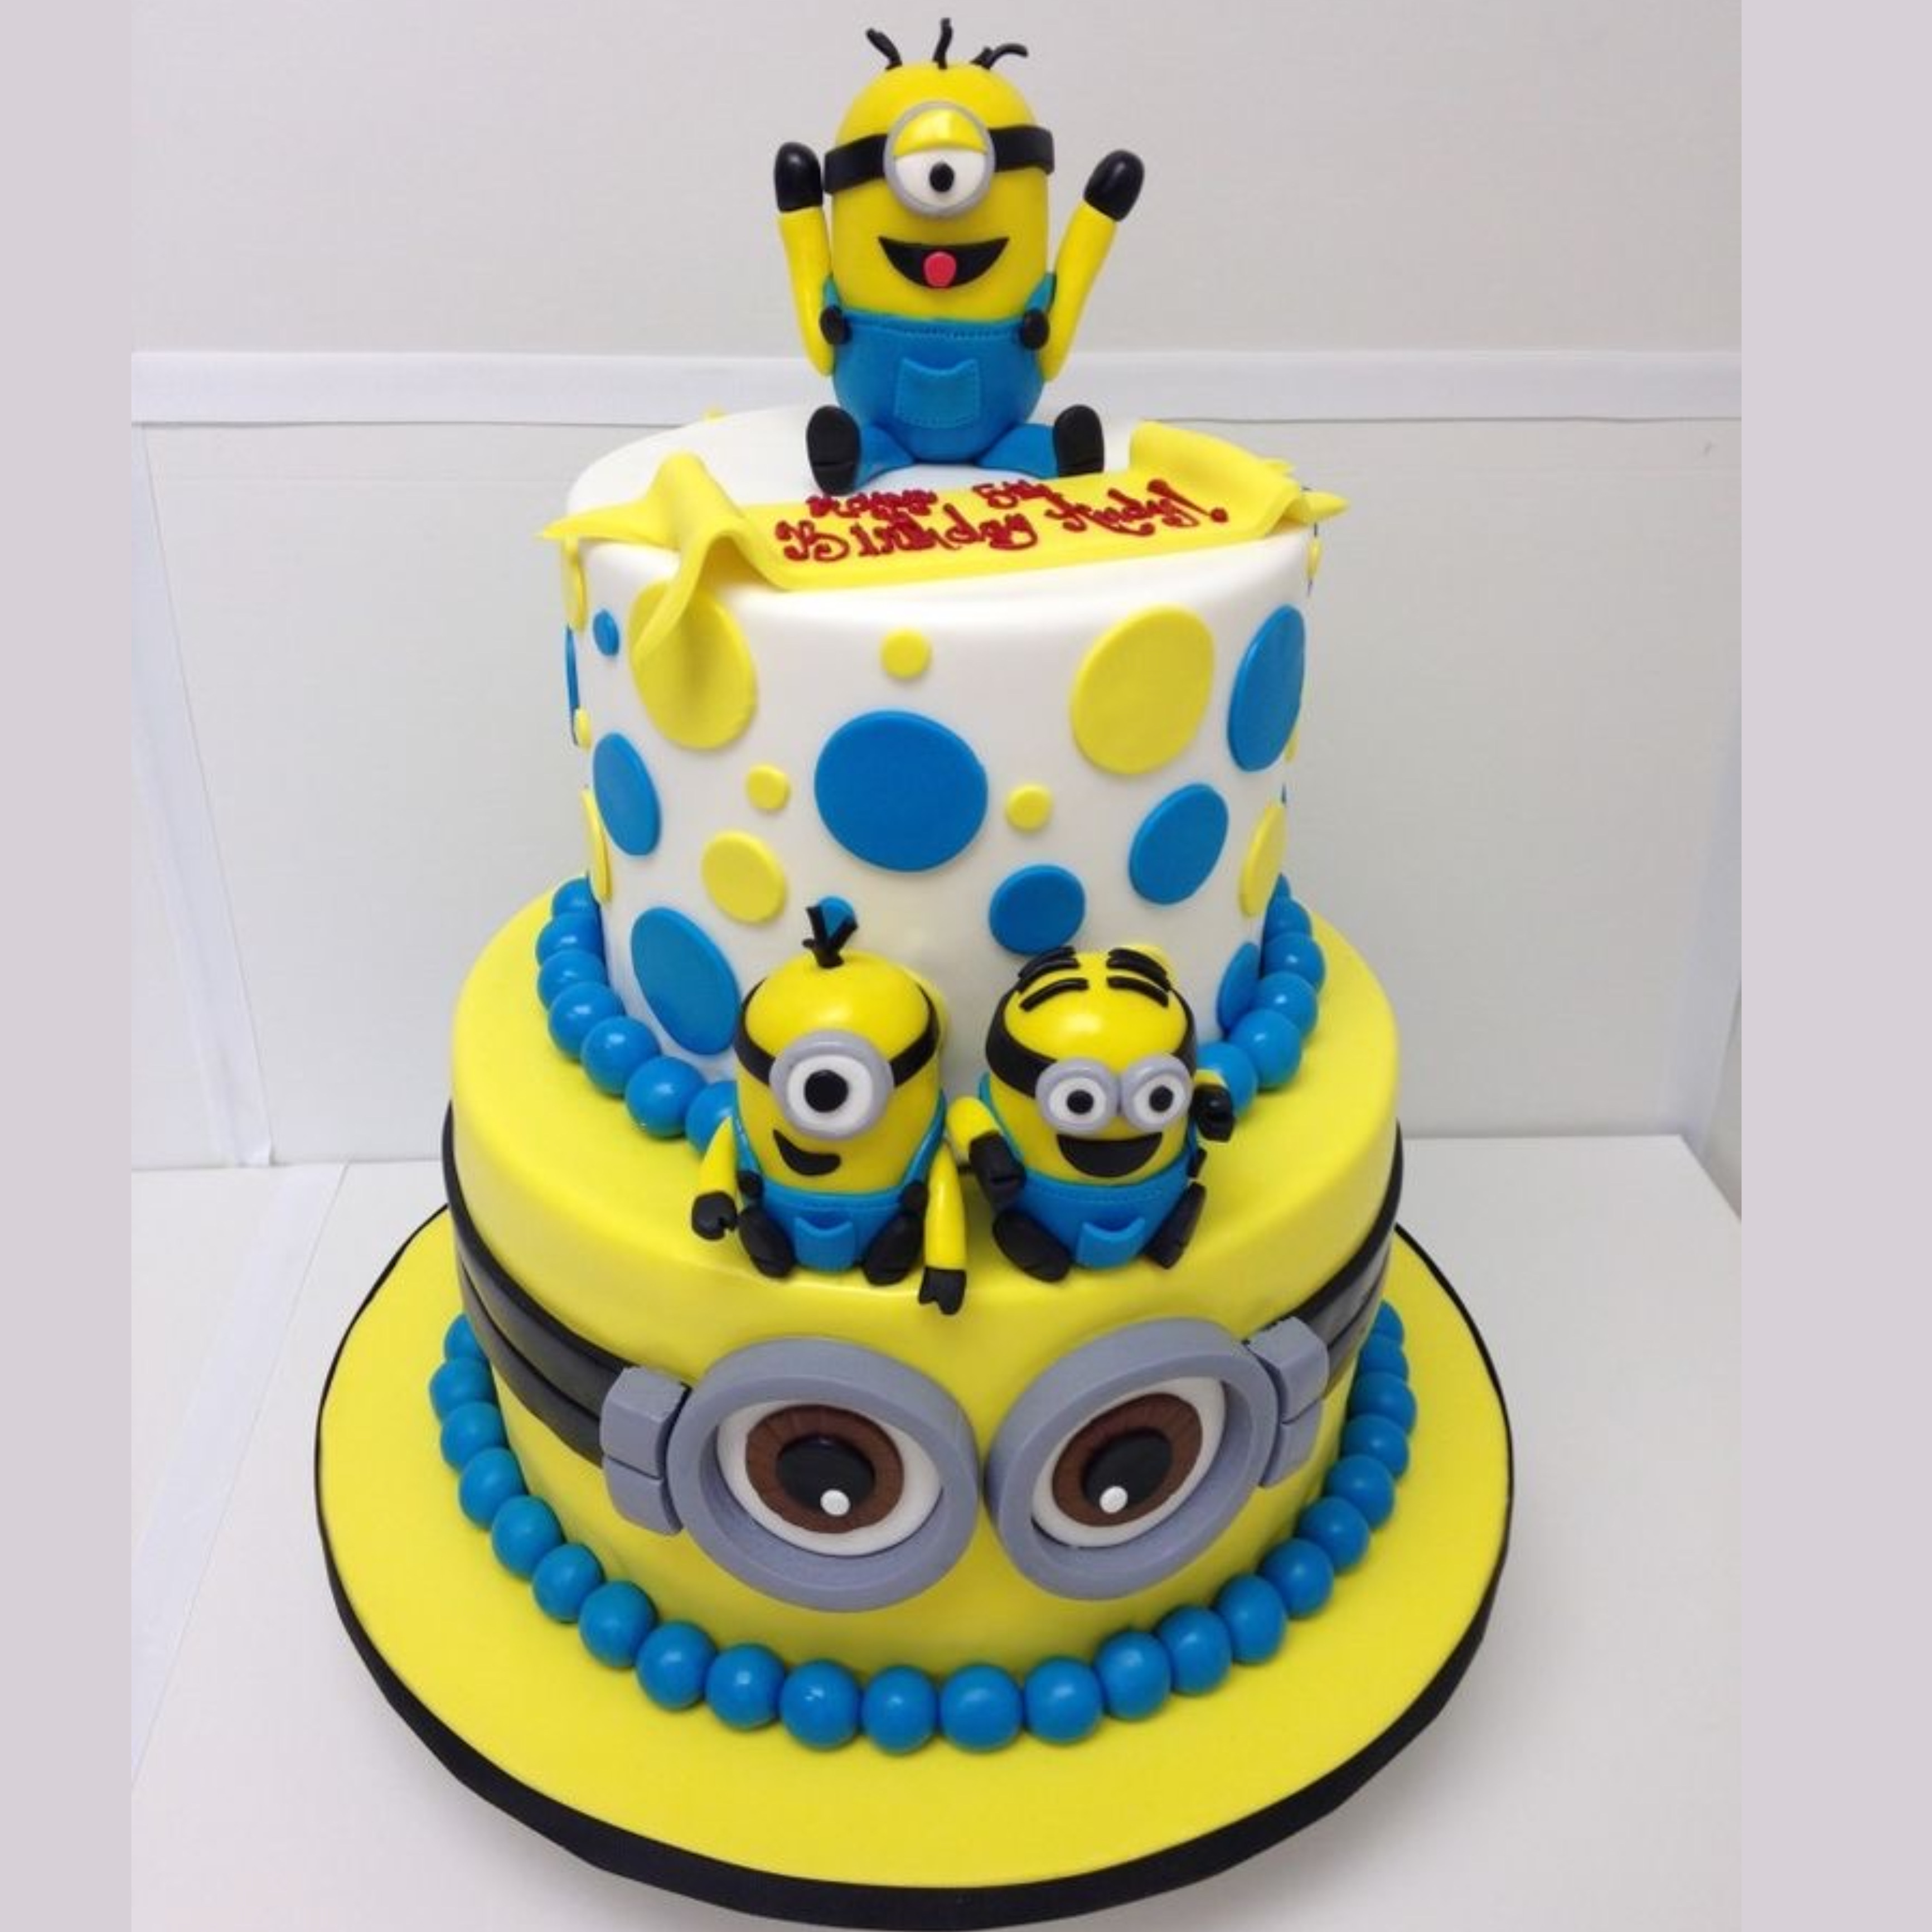 Best Minion Themed Party Cakes in Gurgaon  Gurgaon Bakers